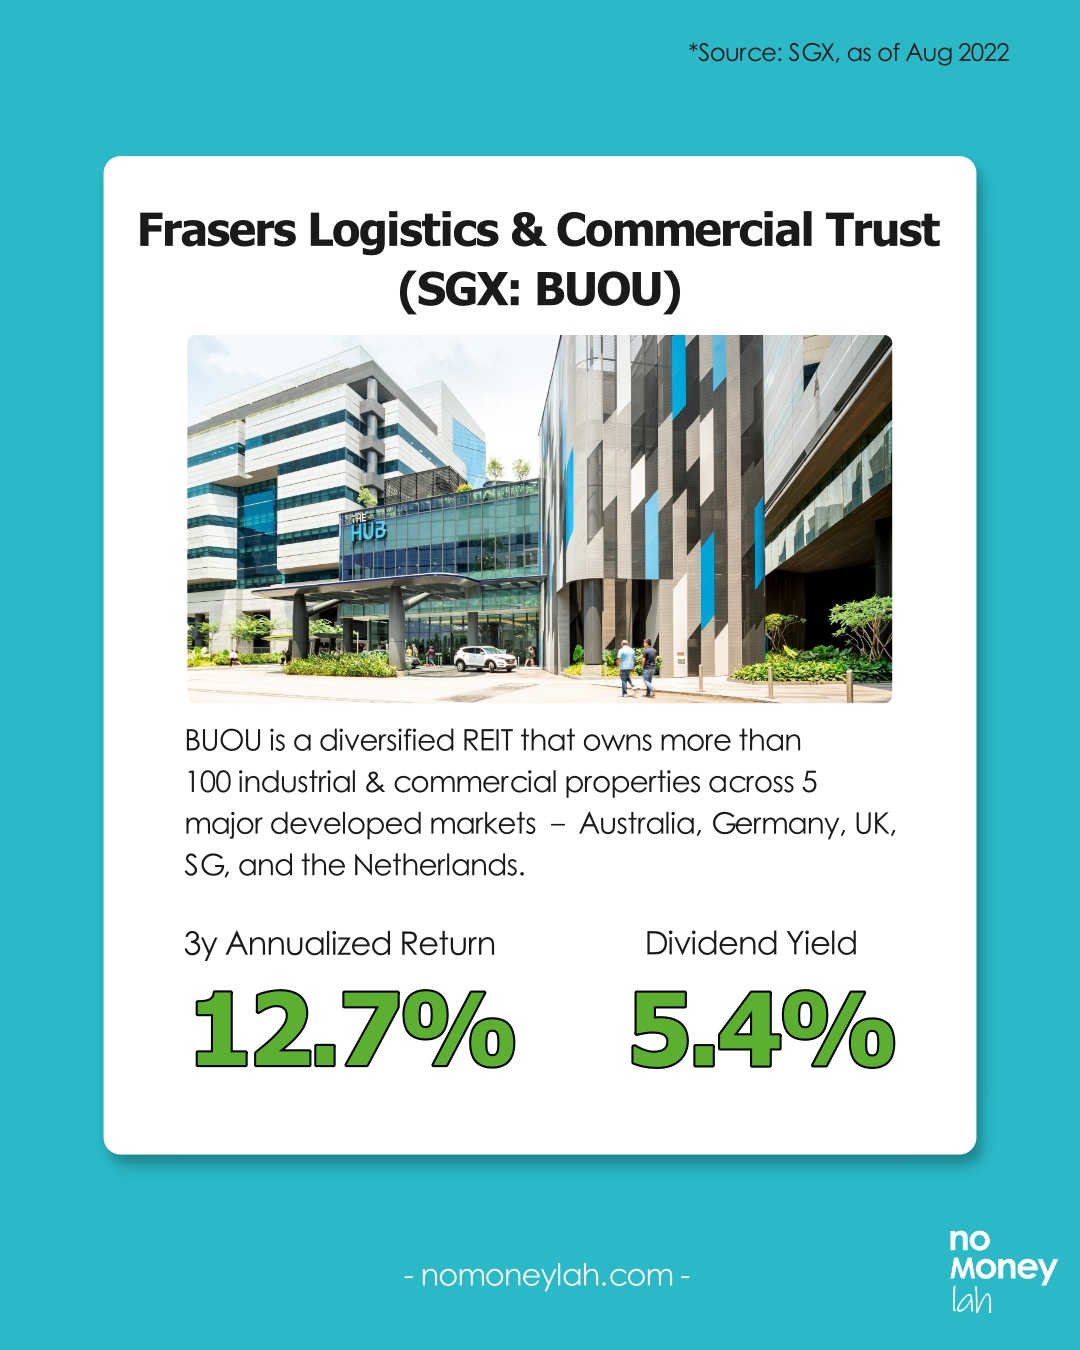 Frasers Logistics & Commercial Trust performance & dividend yield